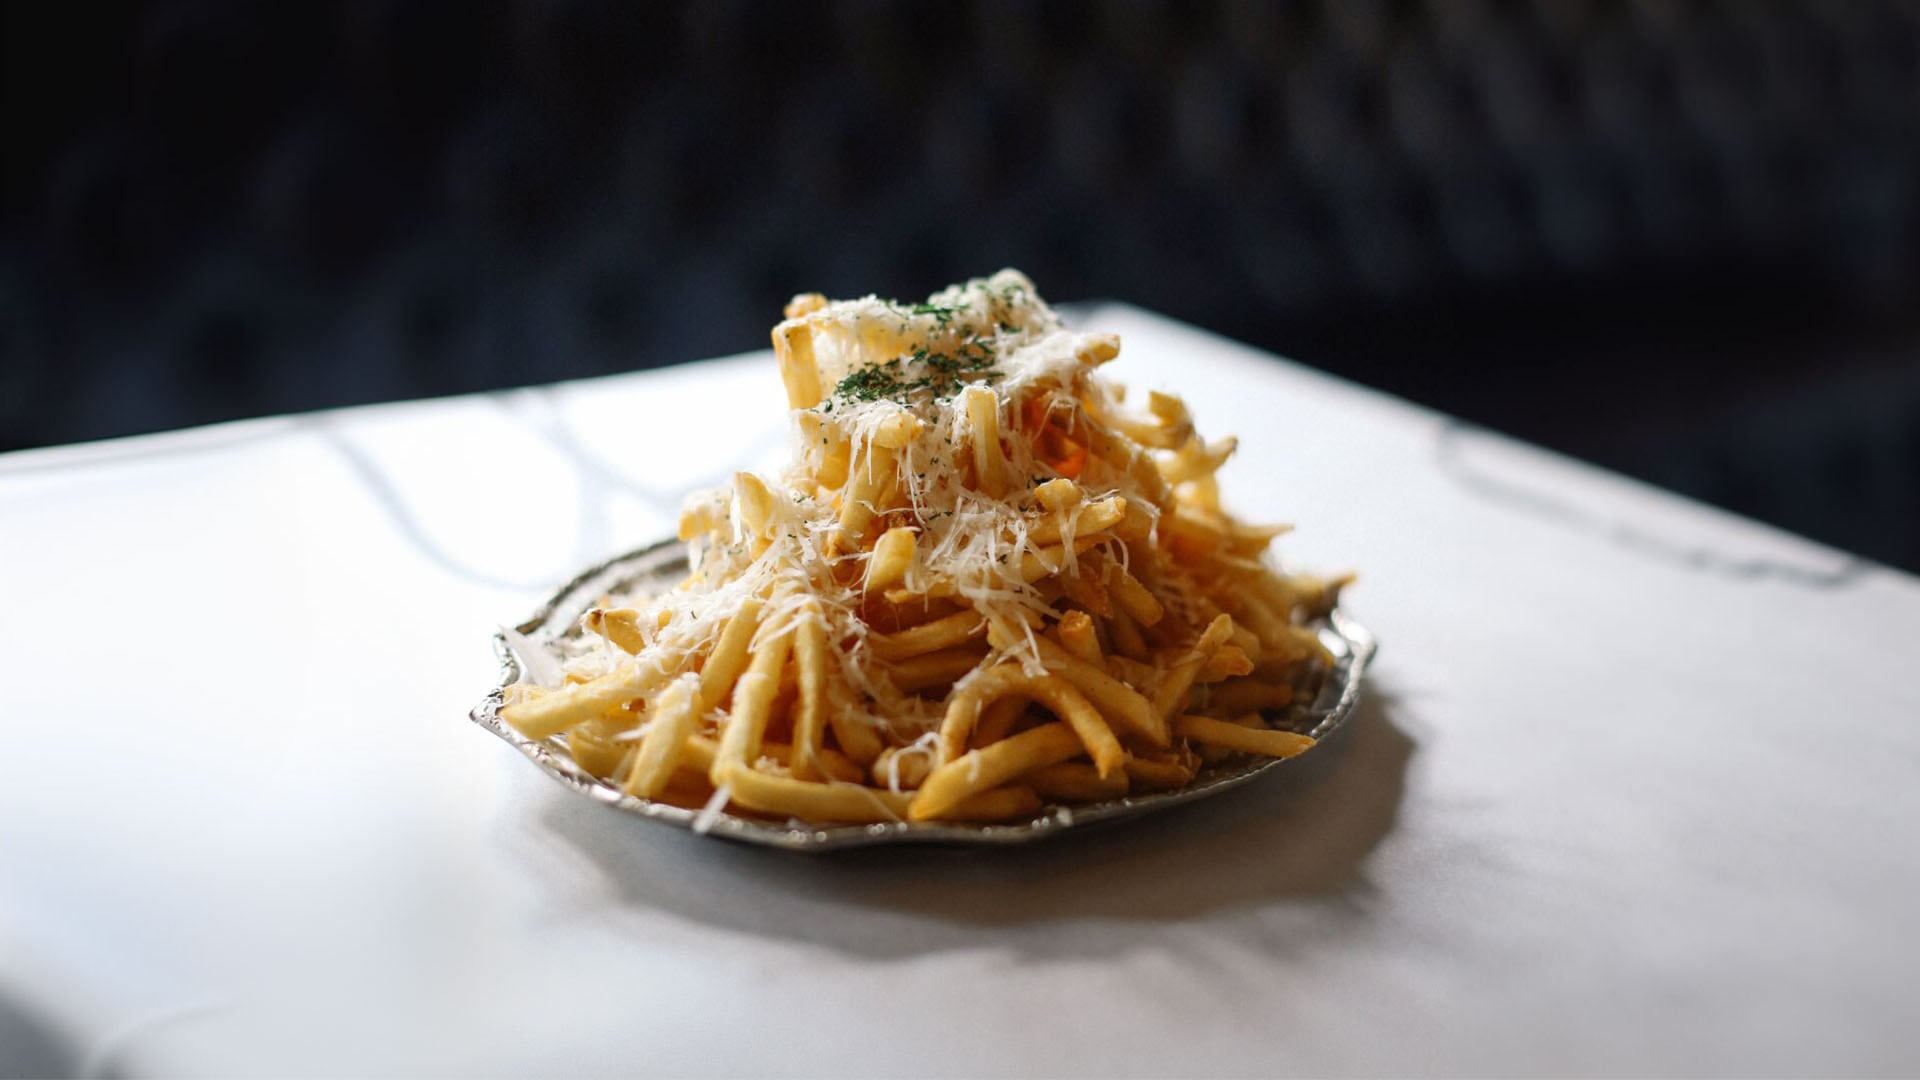 Signature Truffle Shoestring Fries at PS.Cafe Marina Bay Sands, a charming spot for high tea